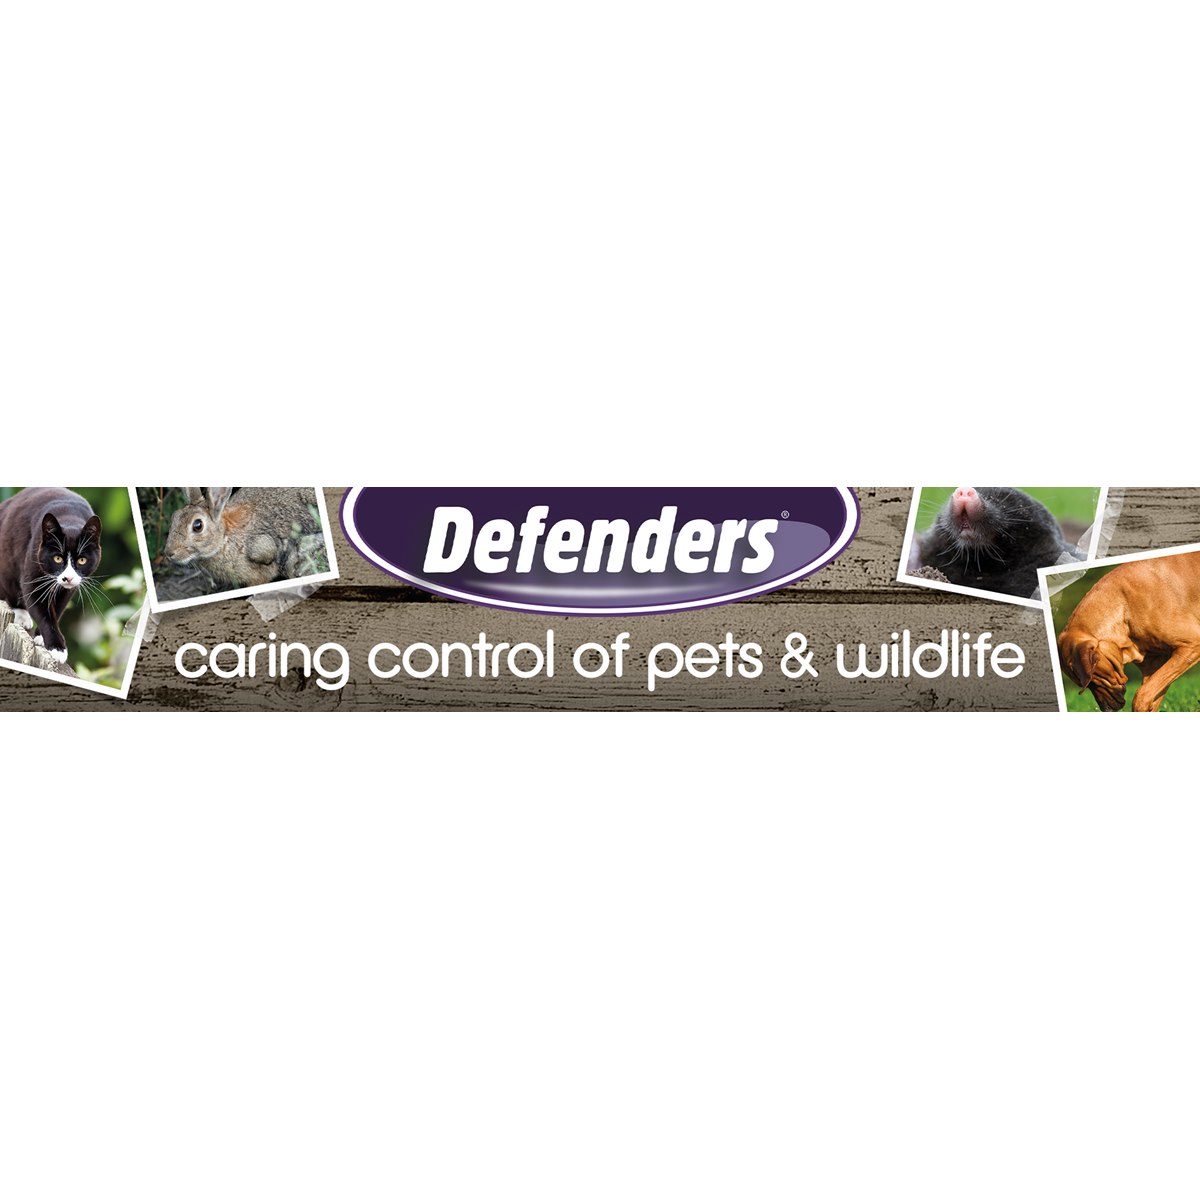 Where to Buy Defenders Products